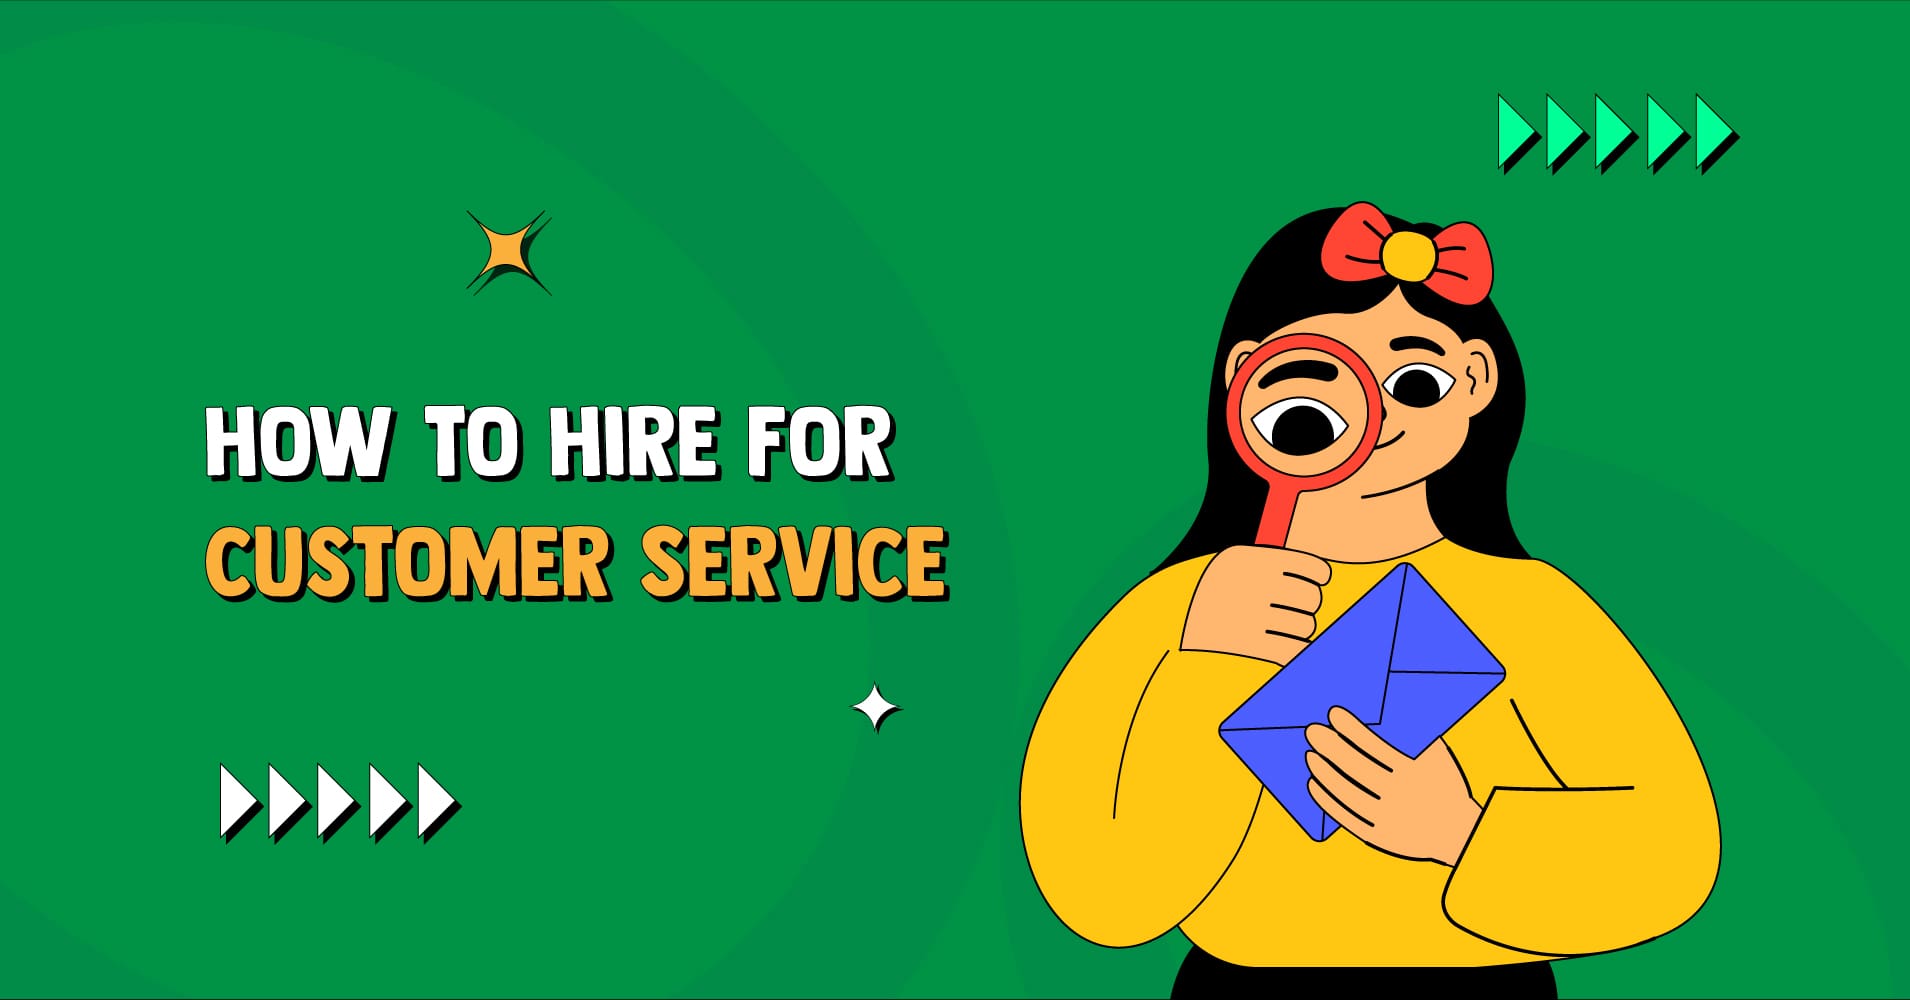 How to hire for customer service